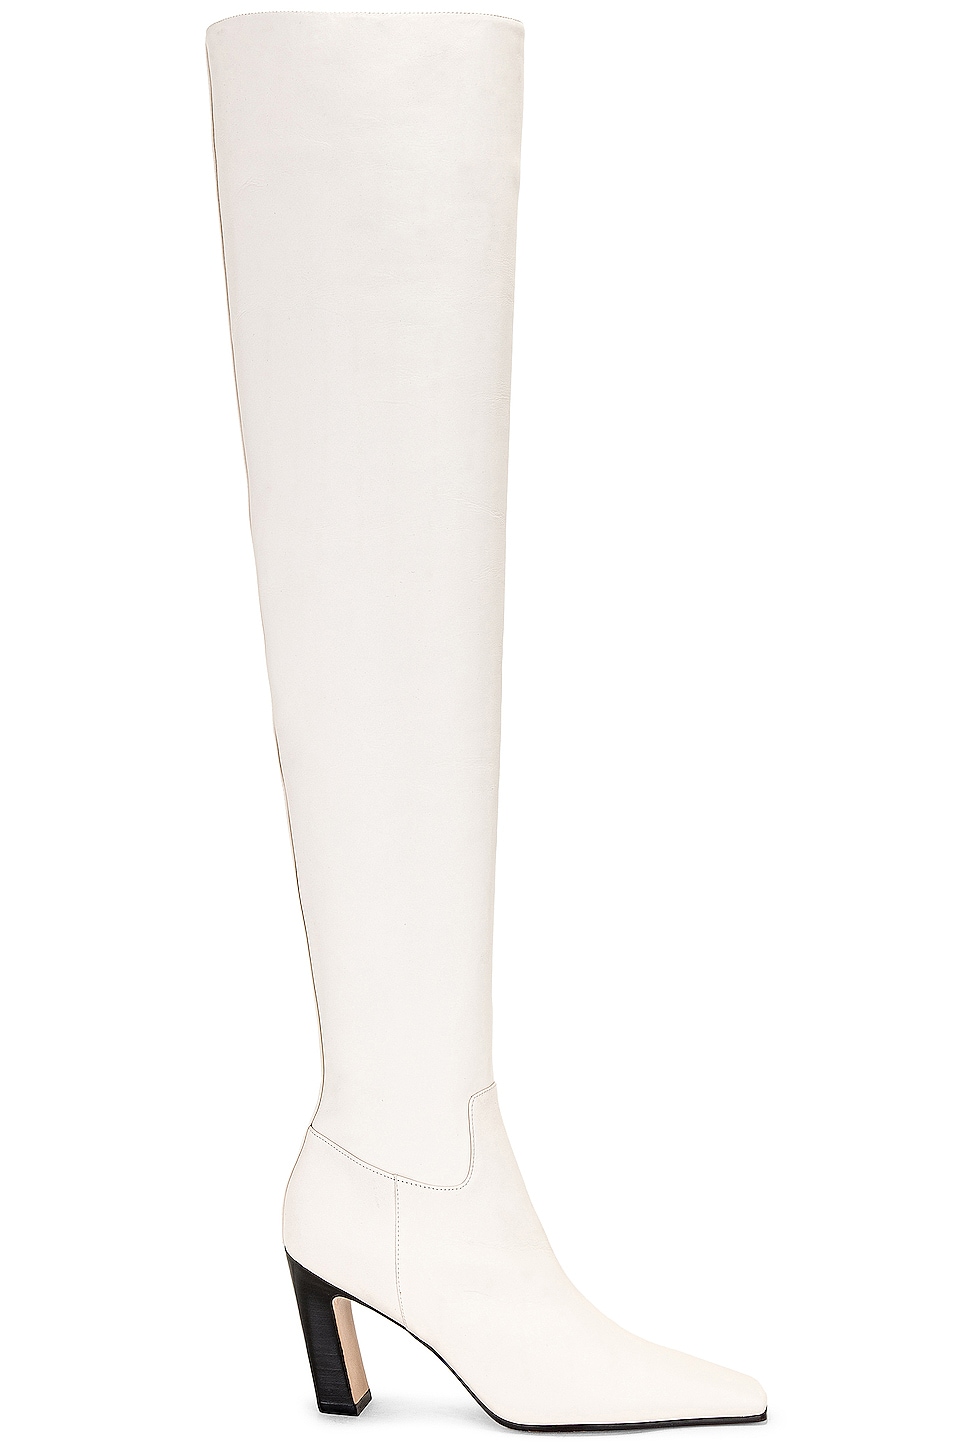 Image 1 of KHAITE Marfa Classic Over The Knee Heel Boot in Off White